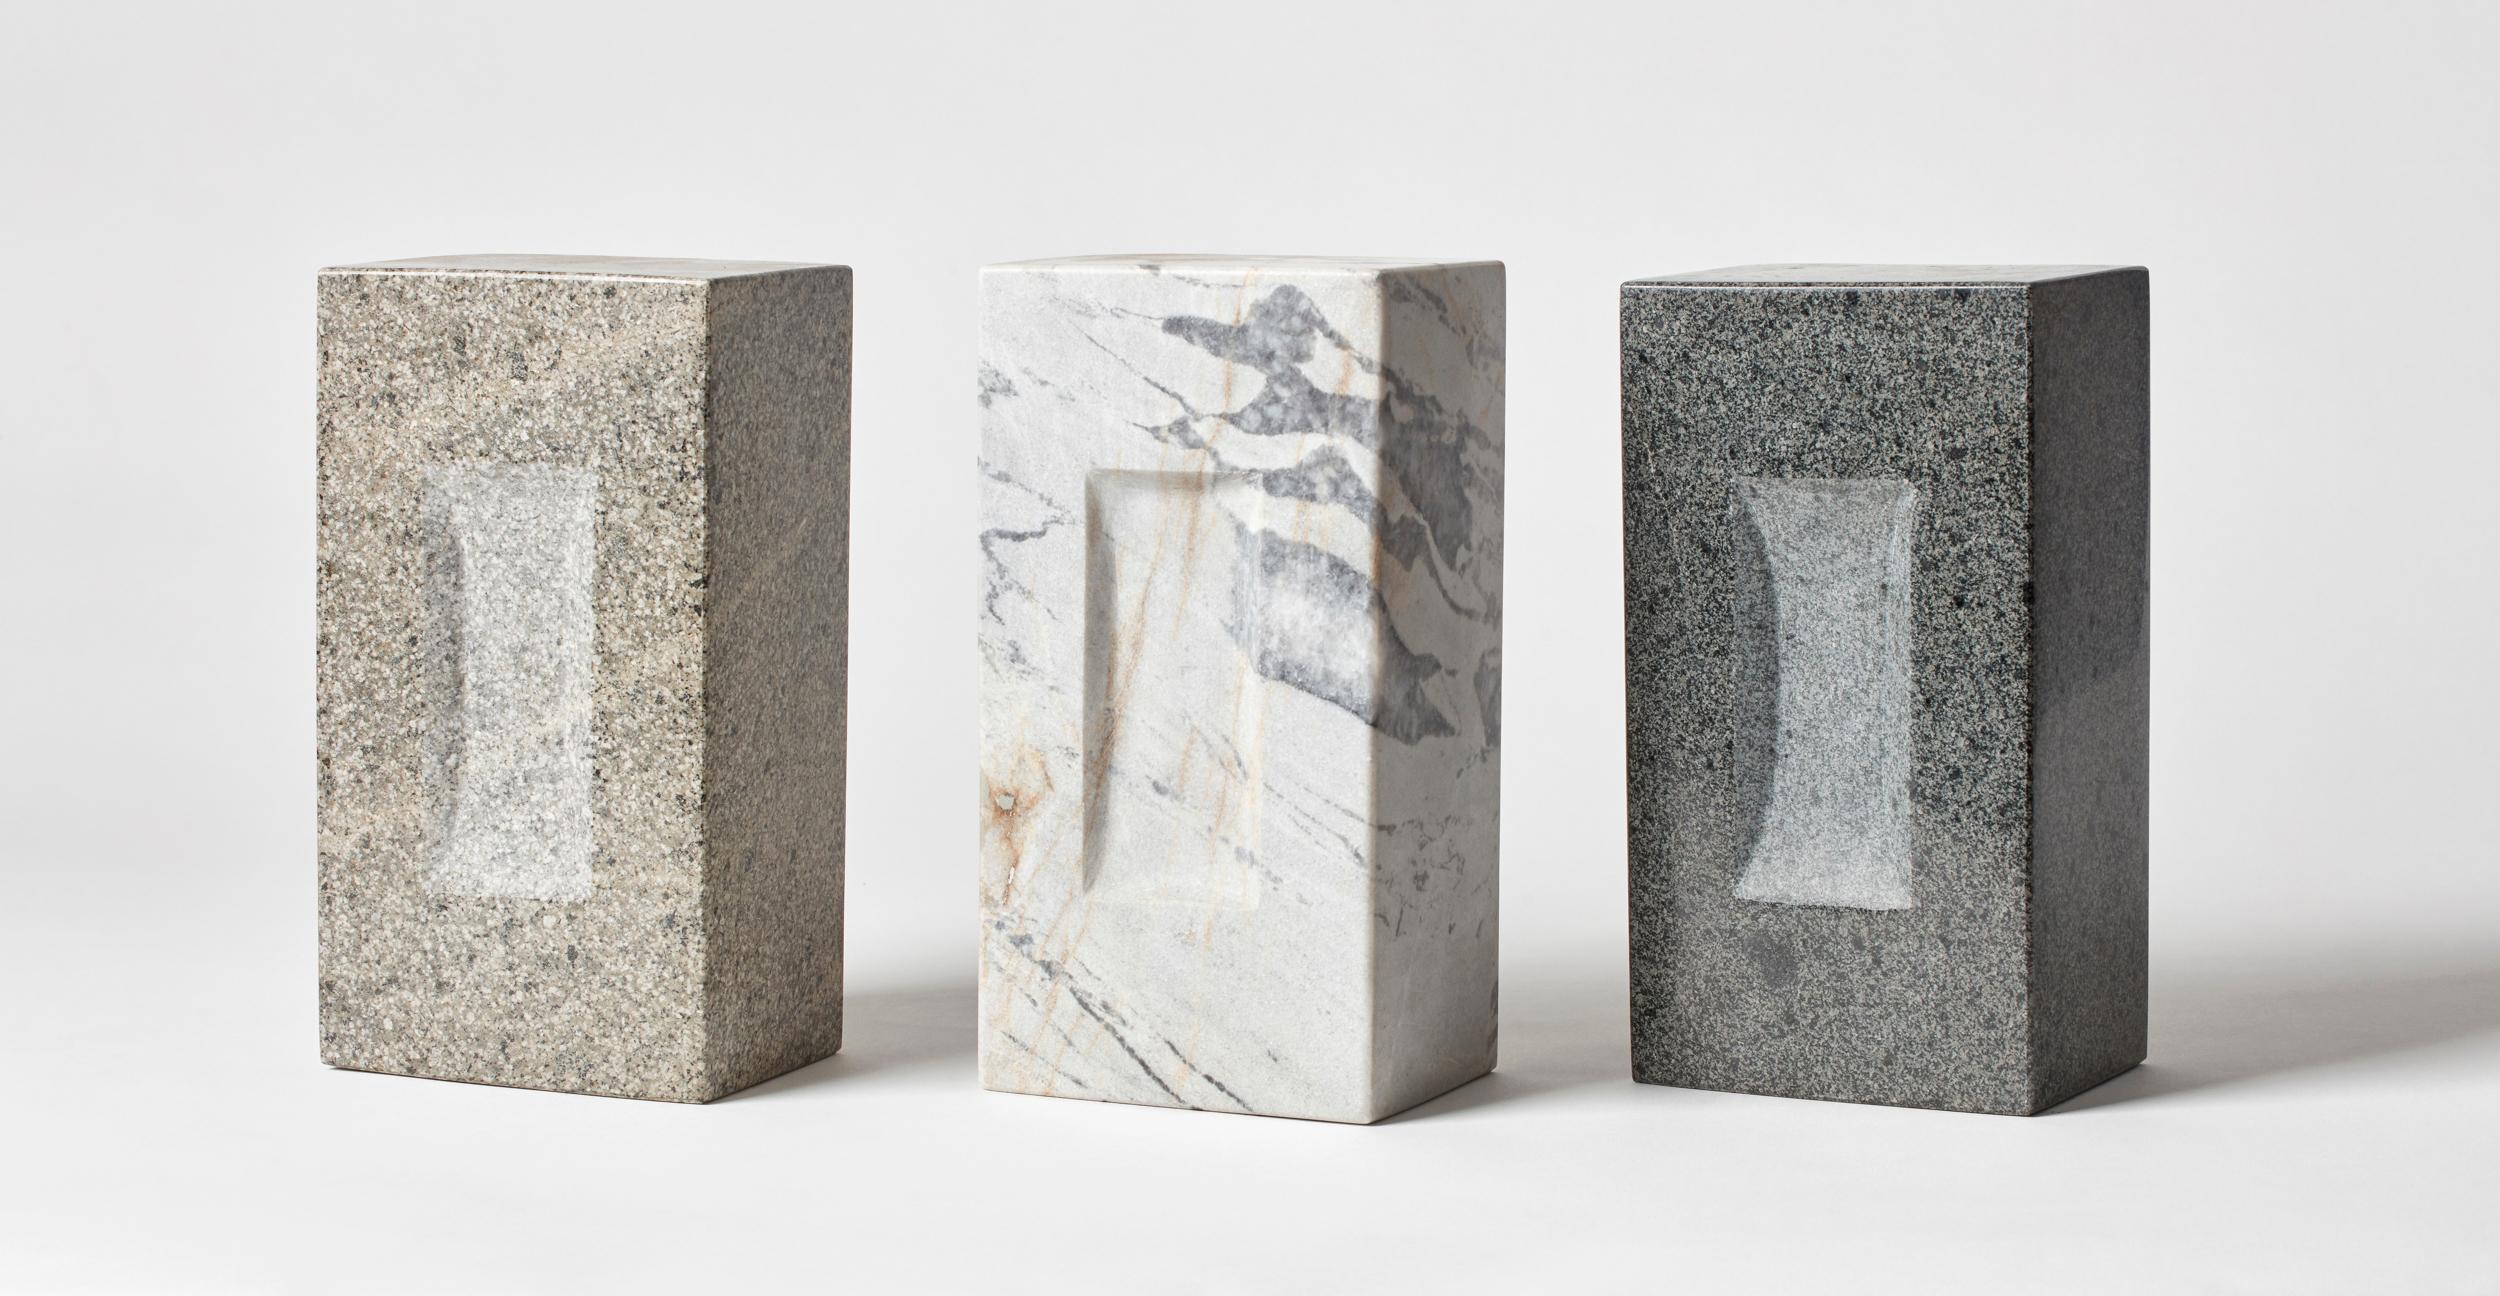 Set of 3 Bricks by Estudio Rafael Freyre
Dimensions: W 12.5 D 9 x H 23 cm 
Materials: Andes Stones
Also Available: Other finishes available.

The brick is a generic constructive element that constitutes part of the urban imaginary. In Peru,